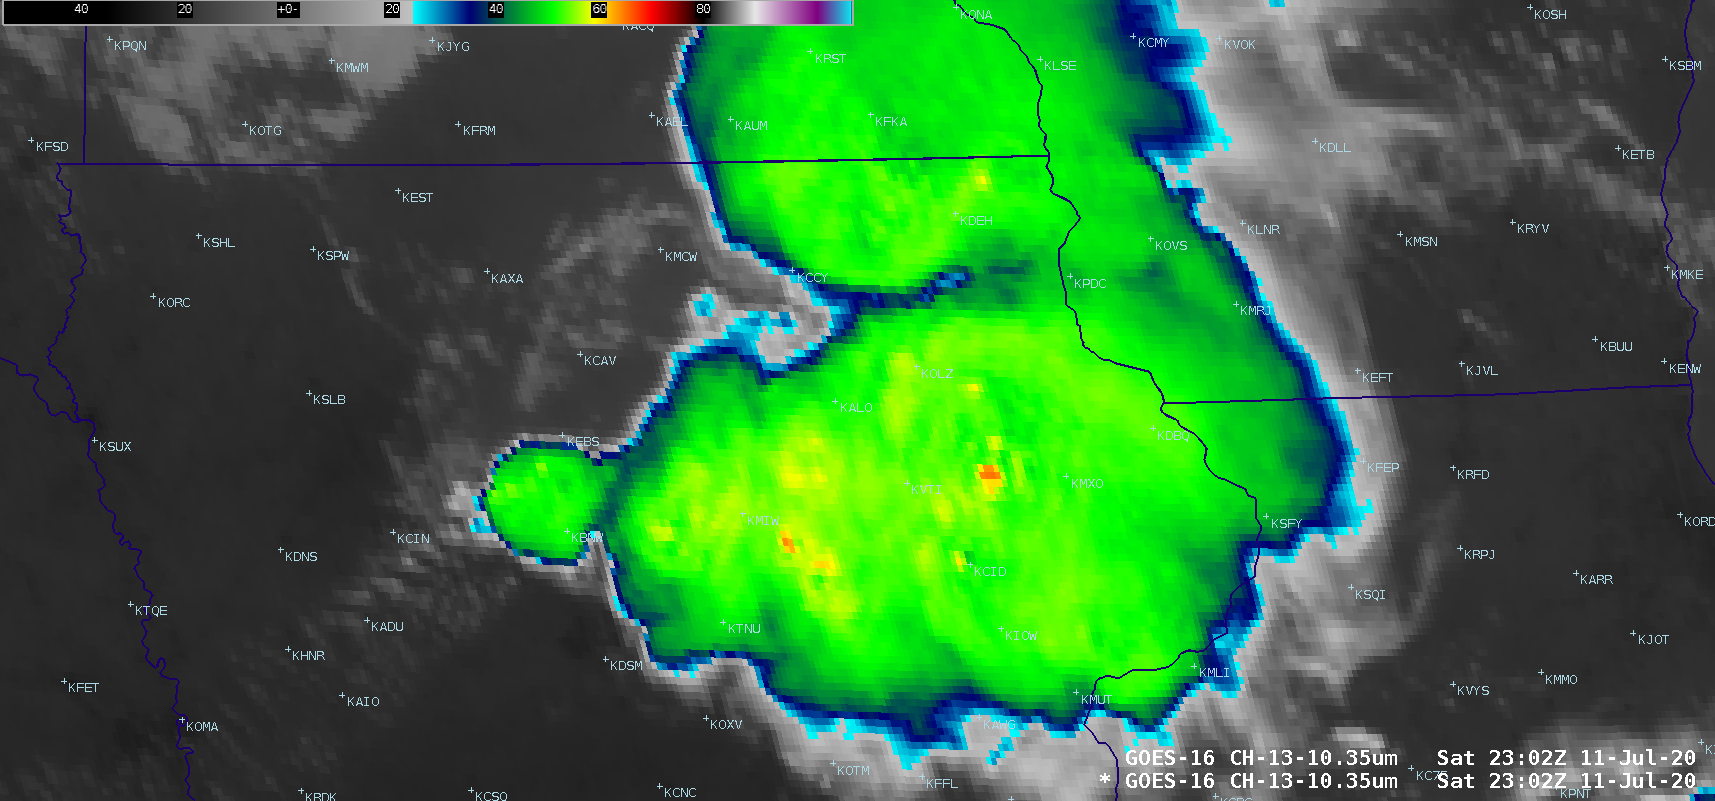 GOES-16 “Clean” Infrared Window (10.35 µm) images [click to play animation | MP4]